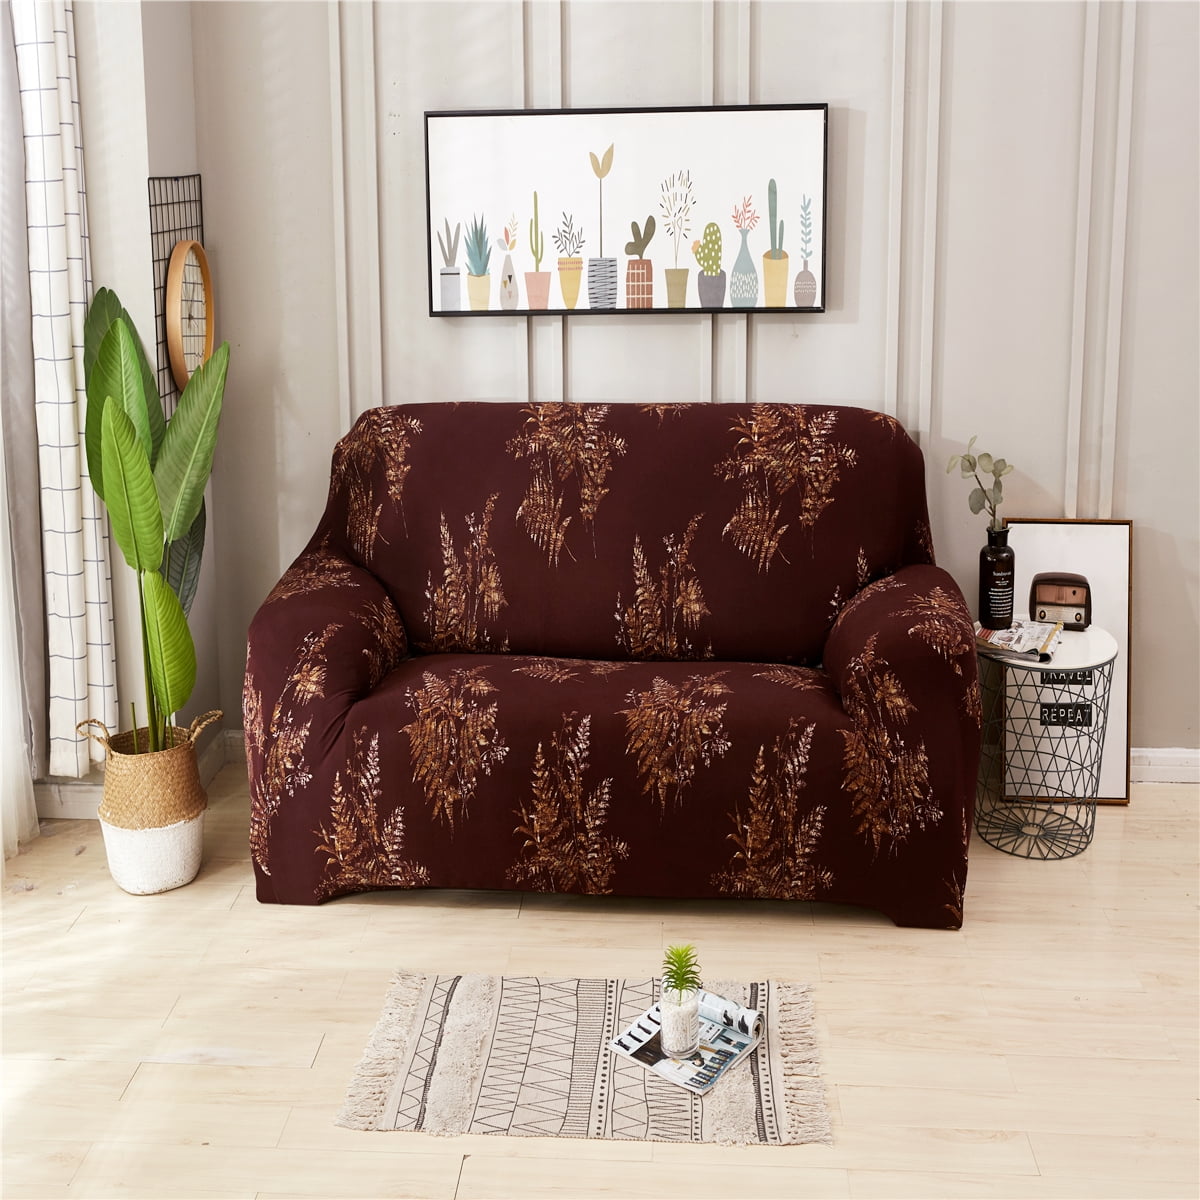 Details about   Stretch Elastic Slipcovers 1/2/3/4 Seater Sofa Cover Room Couch Armchair Cover 